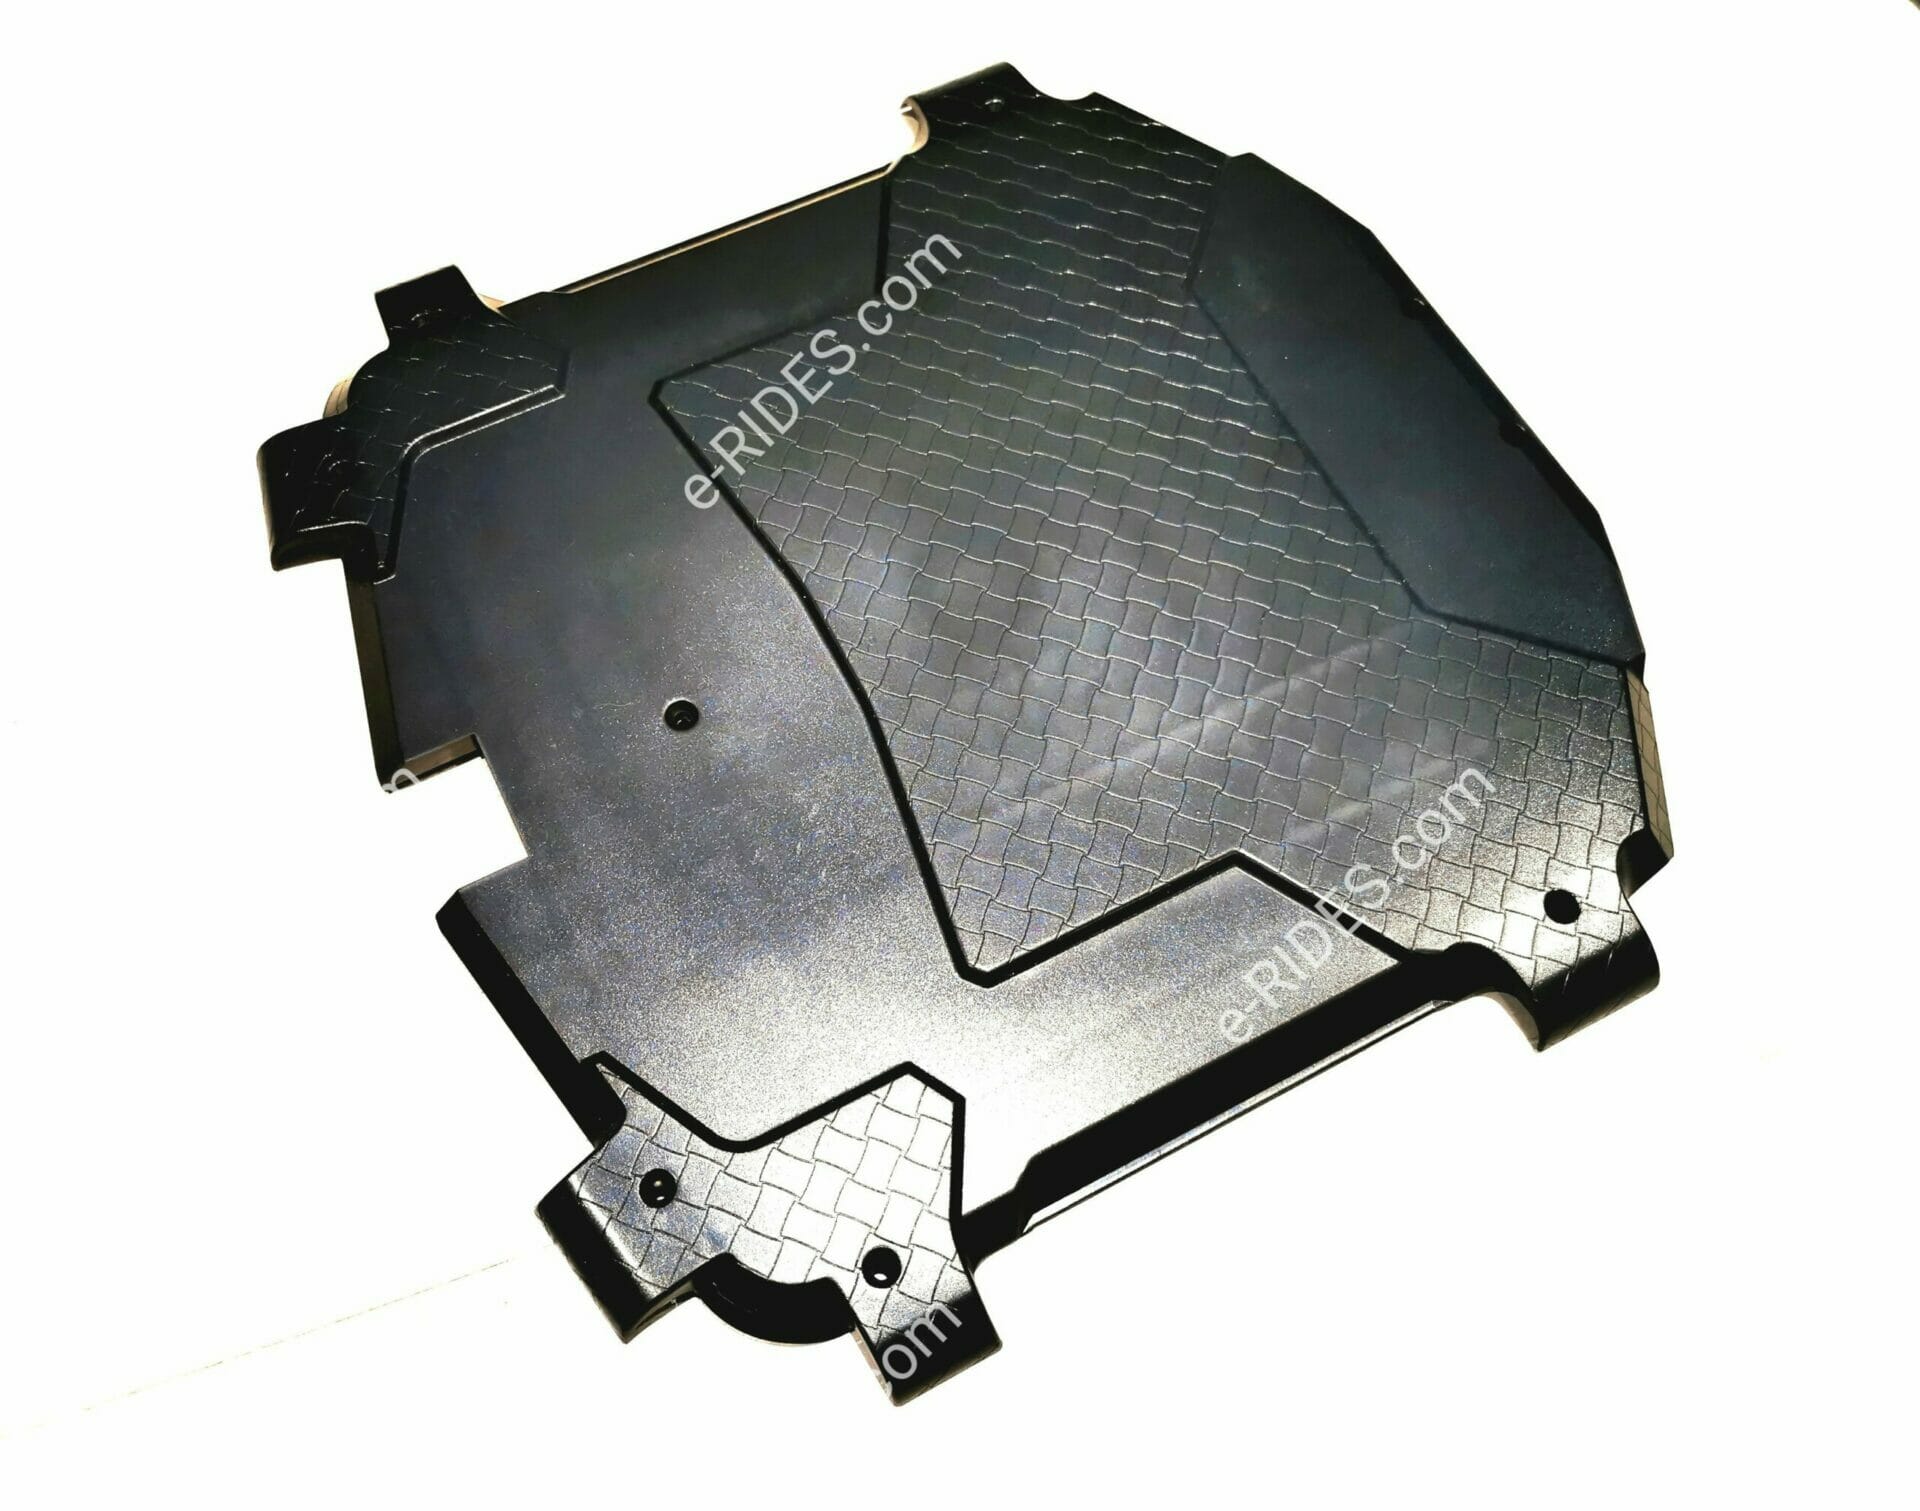 Veteran Sherman Electric Unicycle Outer Shell/Side Panel Cover (one side)